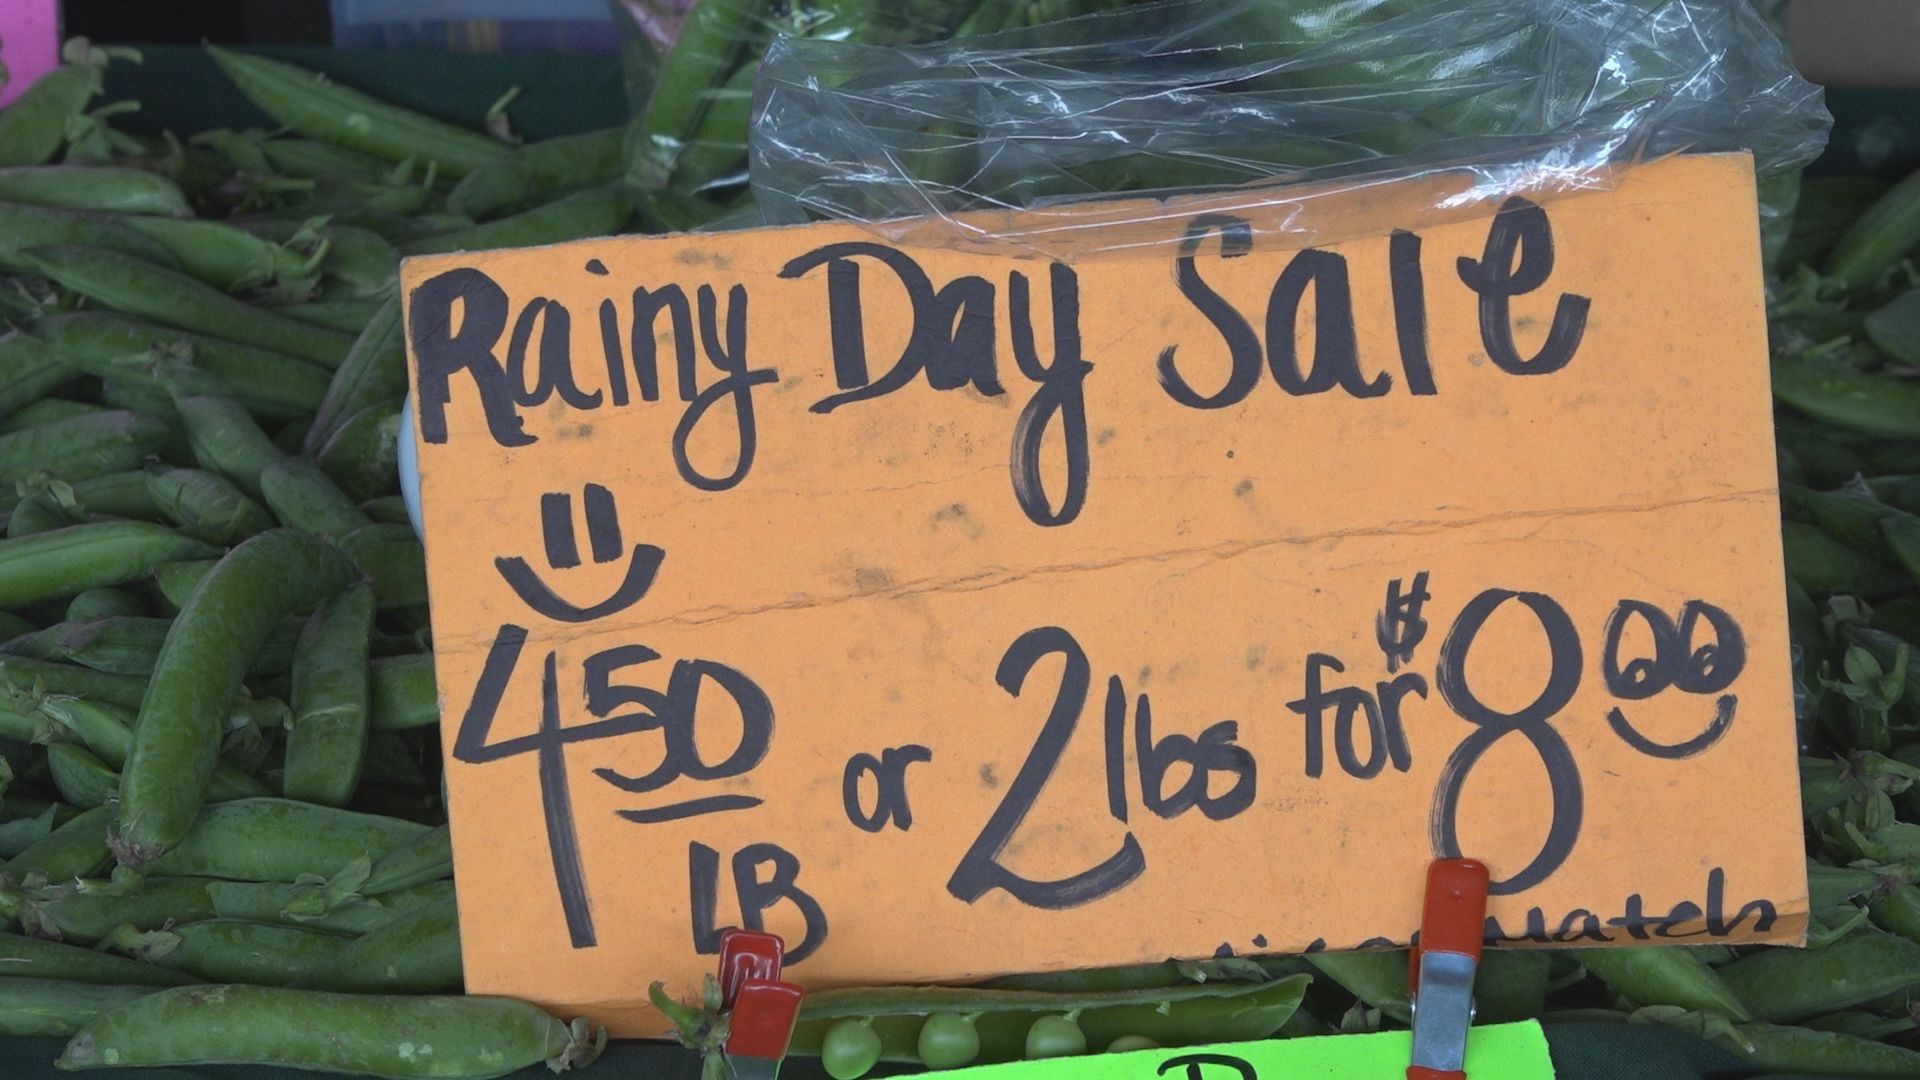 Some growers are leaving the X Street farmers market in Sacramento with half of the produce they were hoping to sell. Weather conditions have slowed down a busy time of the year.